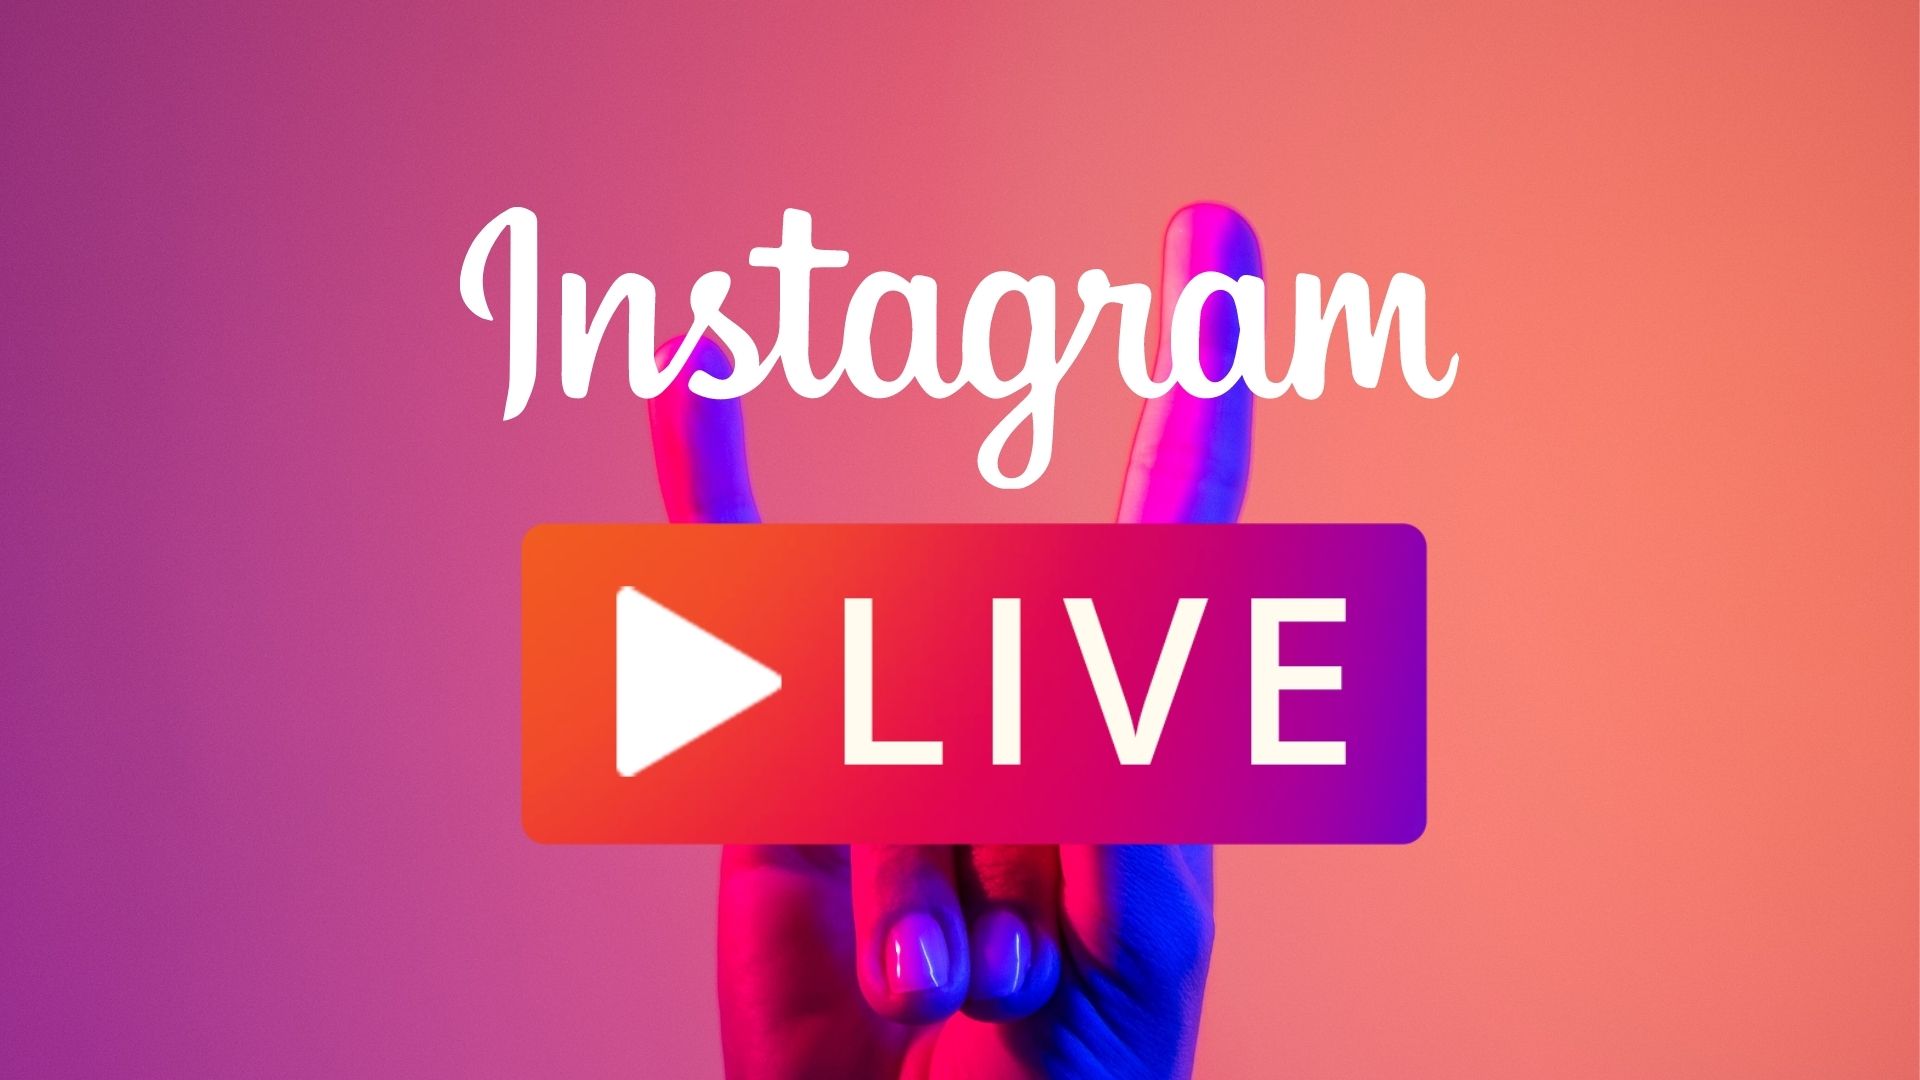 Instagram Live For Business: A Complete Guide To Get Started!